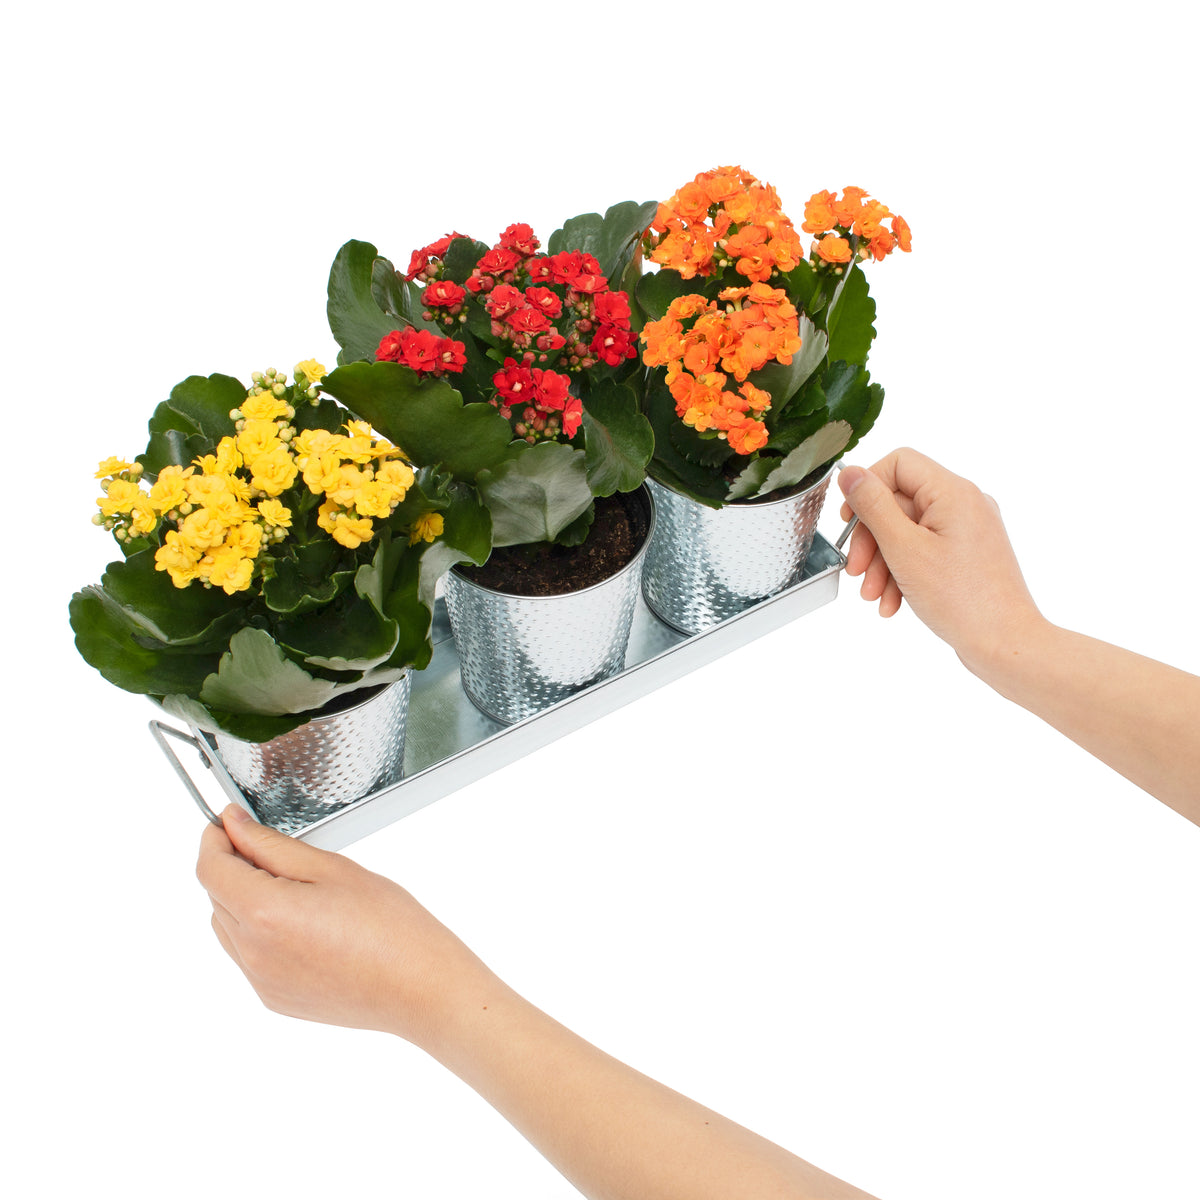 Galvanized planter pots with extra flowers held on top of the tray